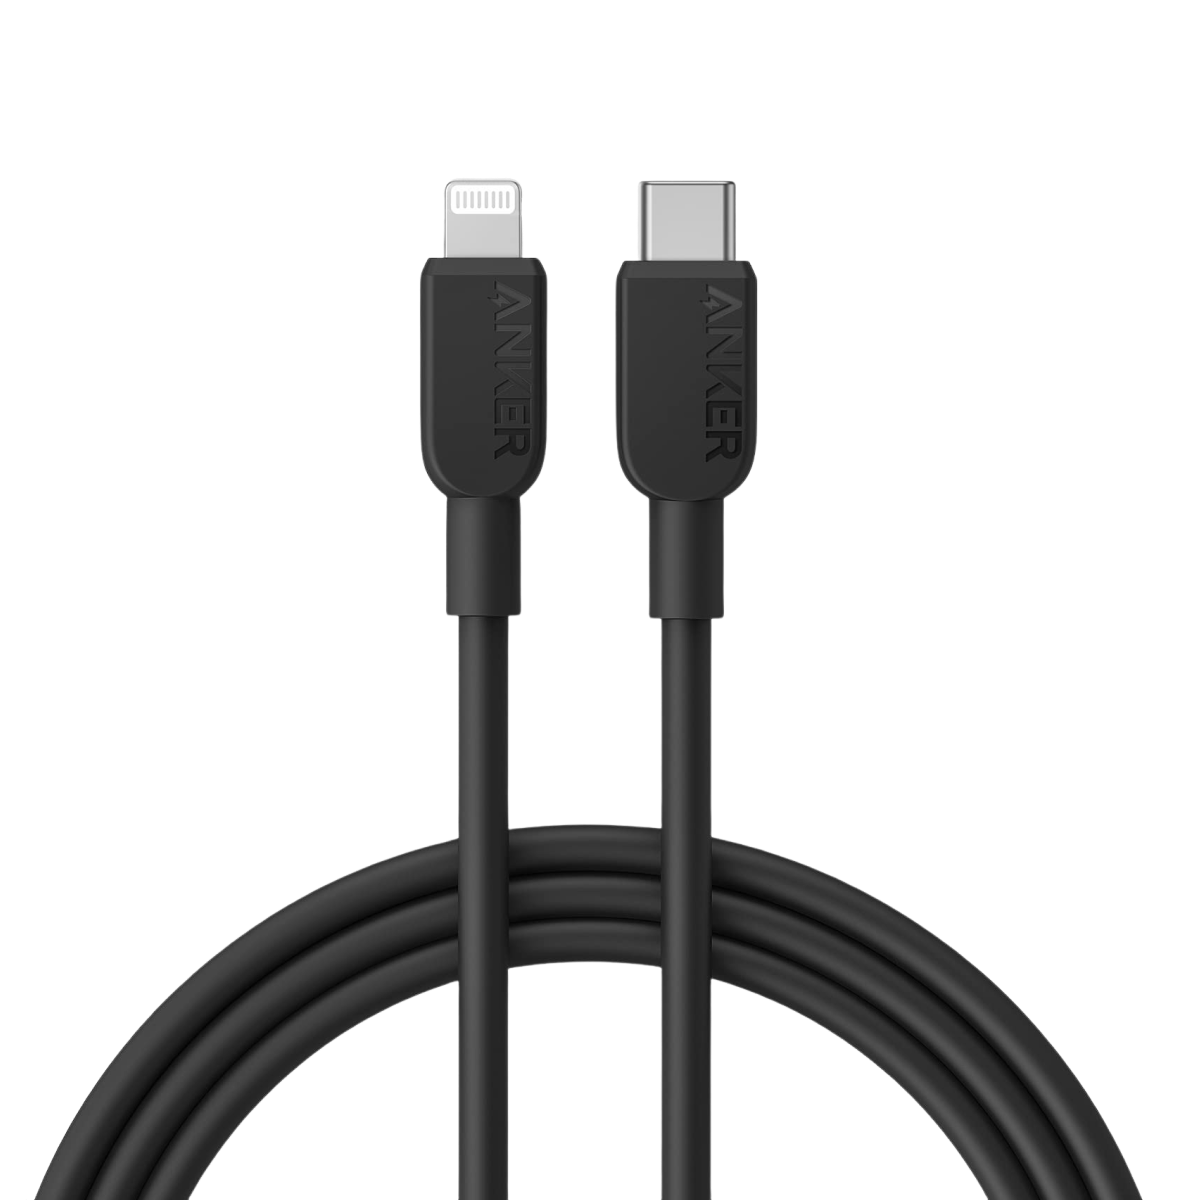 Photos - Cable (video, audio, USB) ANKER 310 USB-C to Lightning Cable 3ft / Black A81A1011 